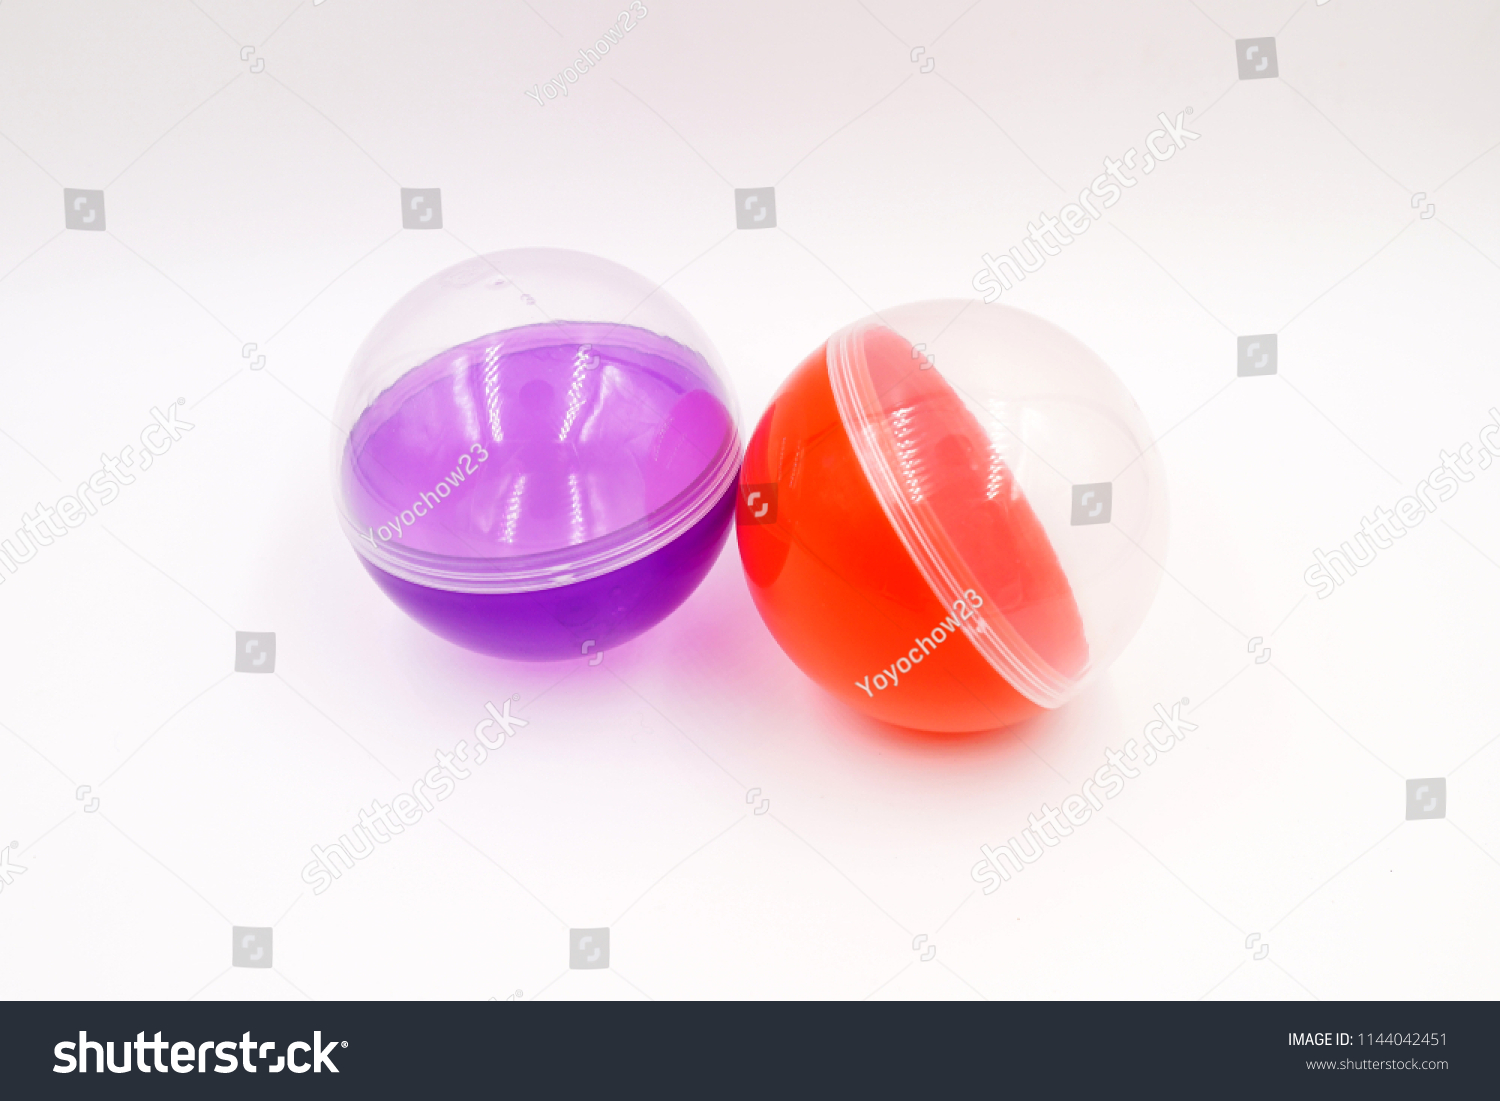 Gashapon, toy in a ball #1144042451